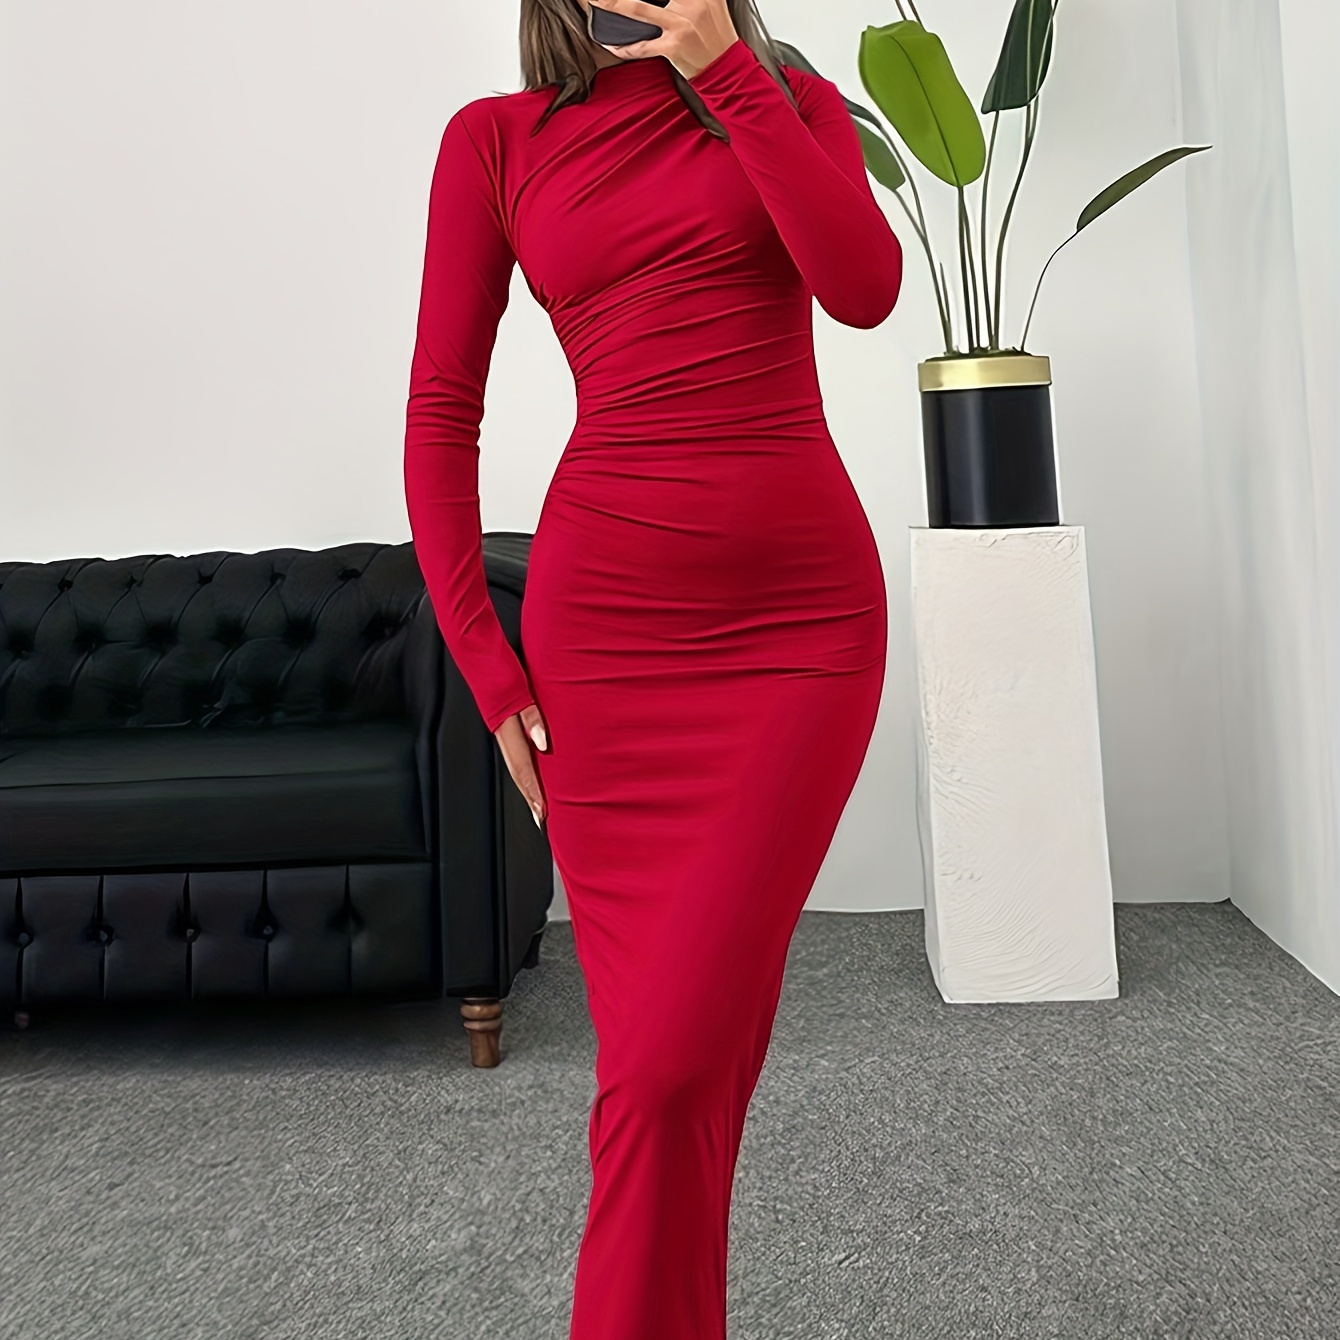 

Solid Color Ruched Slim Dress, Elegant Long Sleeve Maxi Bodycon Dress For Party & Banquet, Women's Clothing